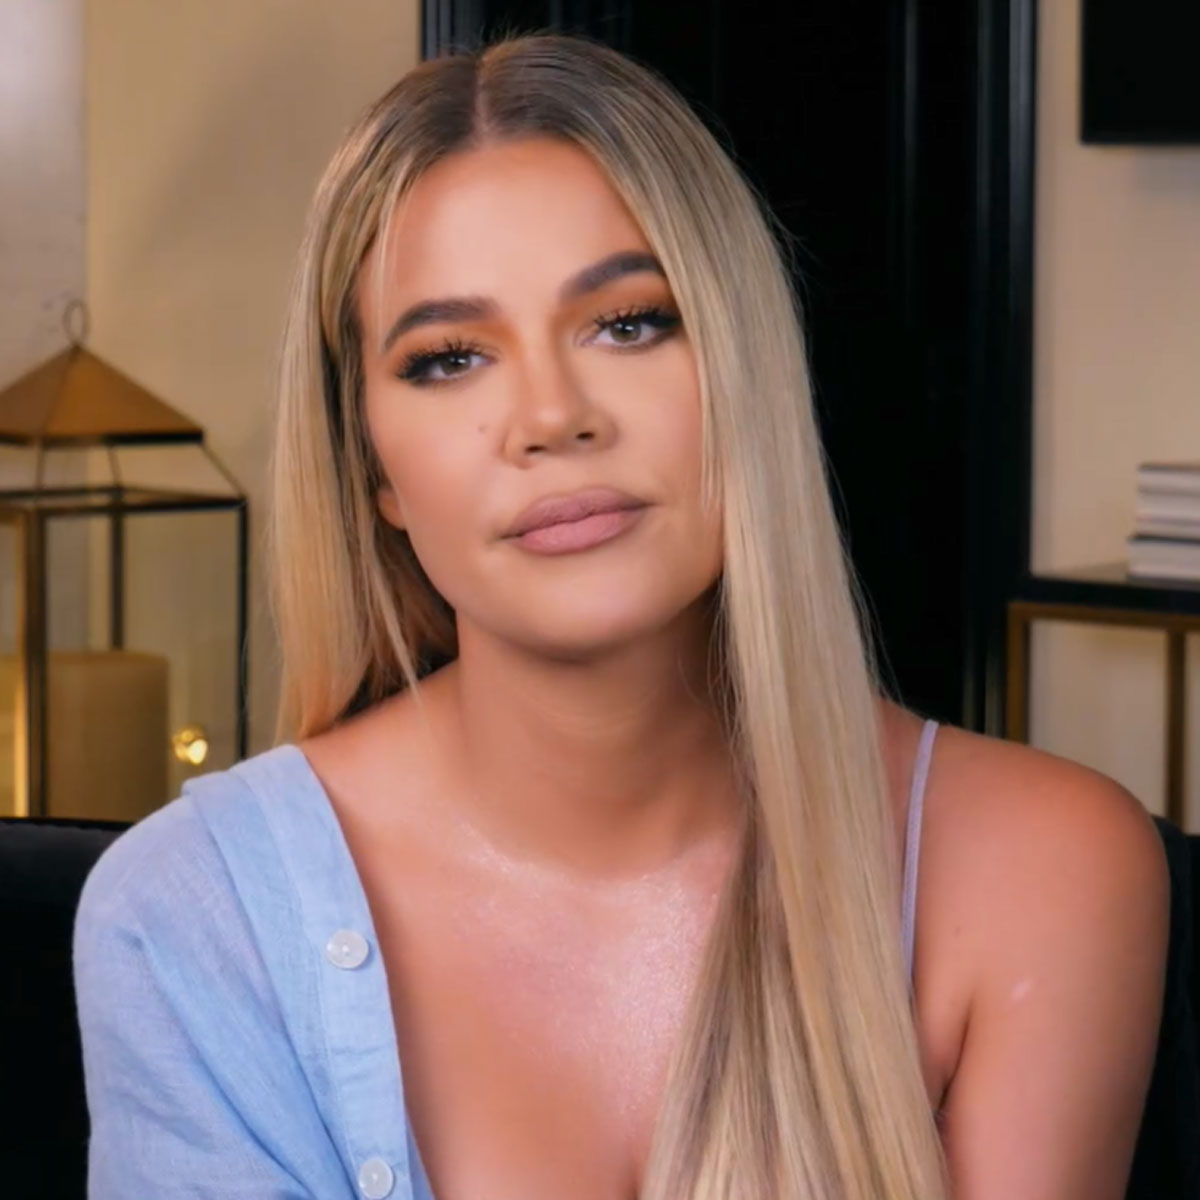 Khloe Kardashian’s Face Tumor Here’s What You Need To Know